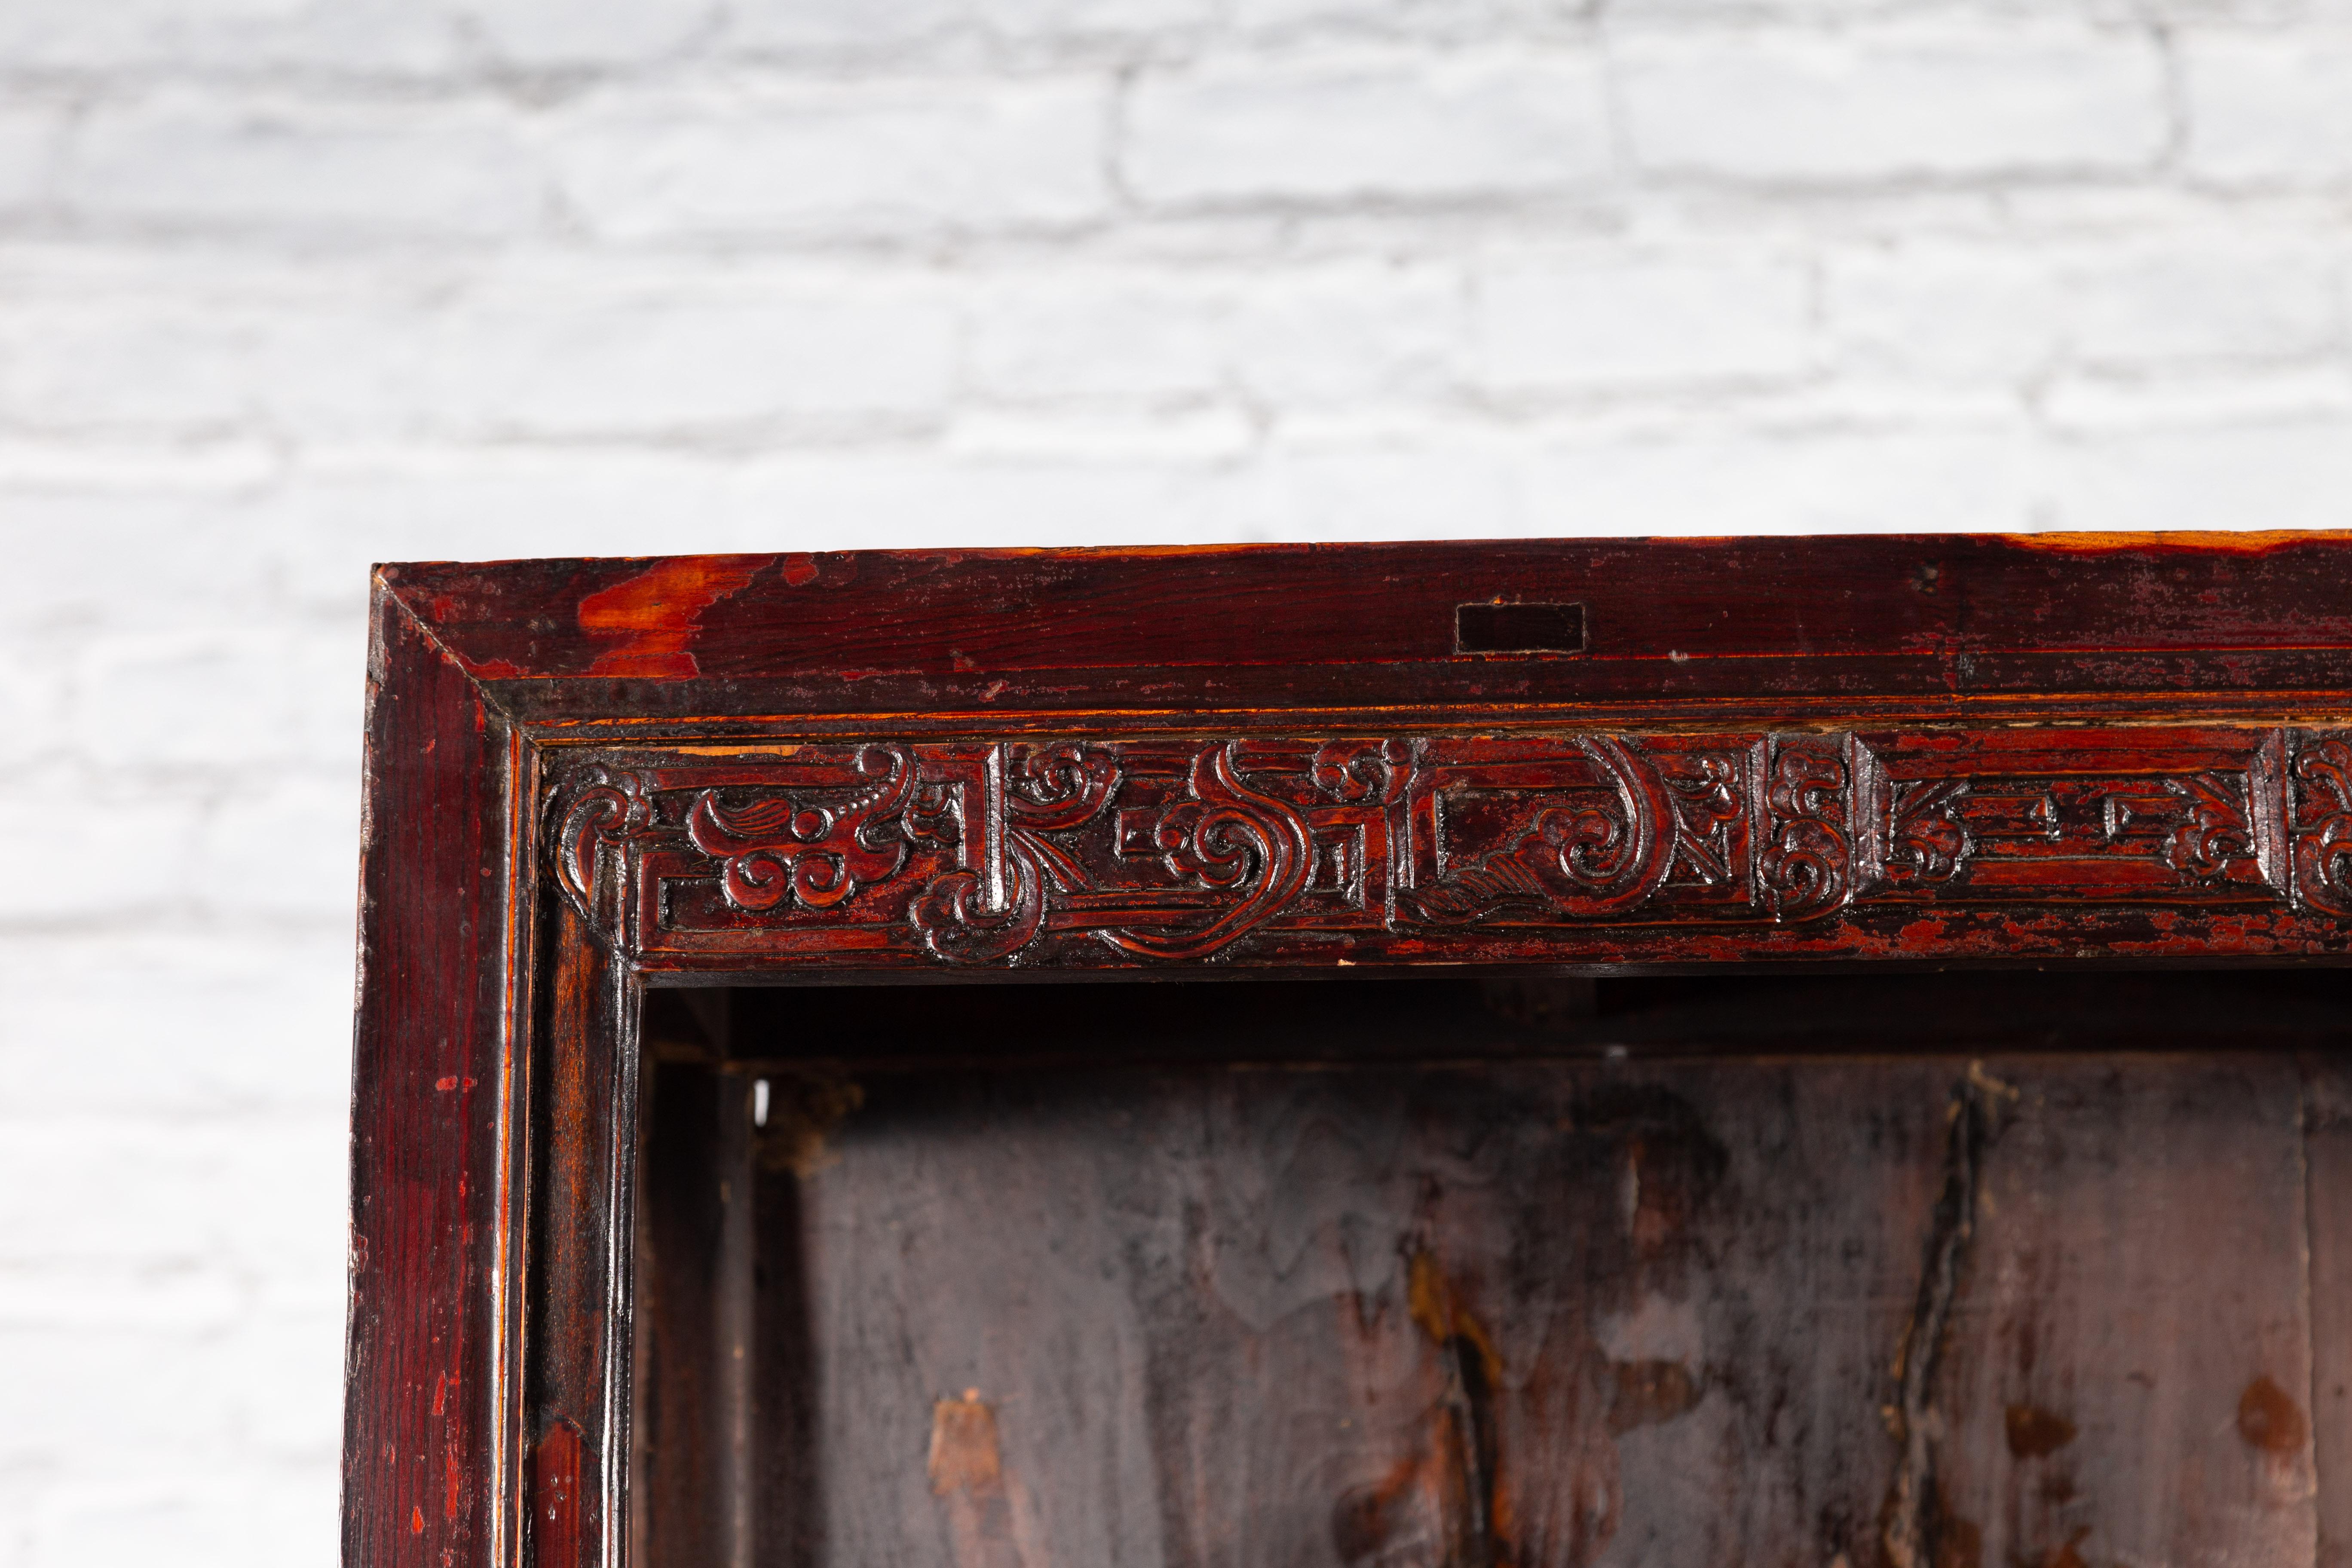 Chinese Qing Dynasty 19th Century Lacquered Cabinet with Carved Dragon Motifs For Sale 4